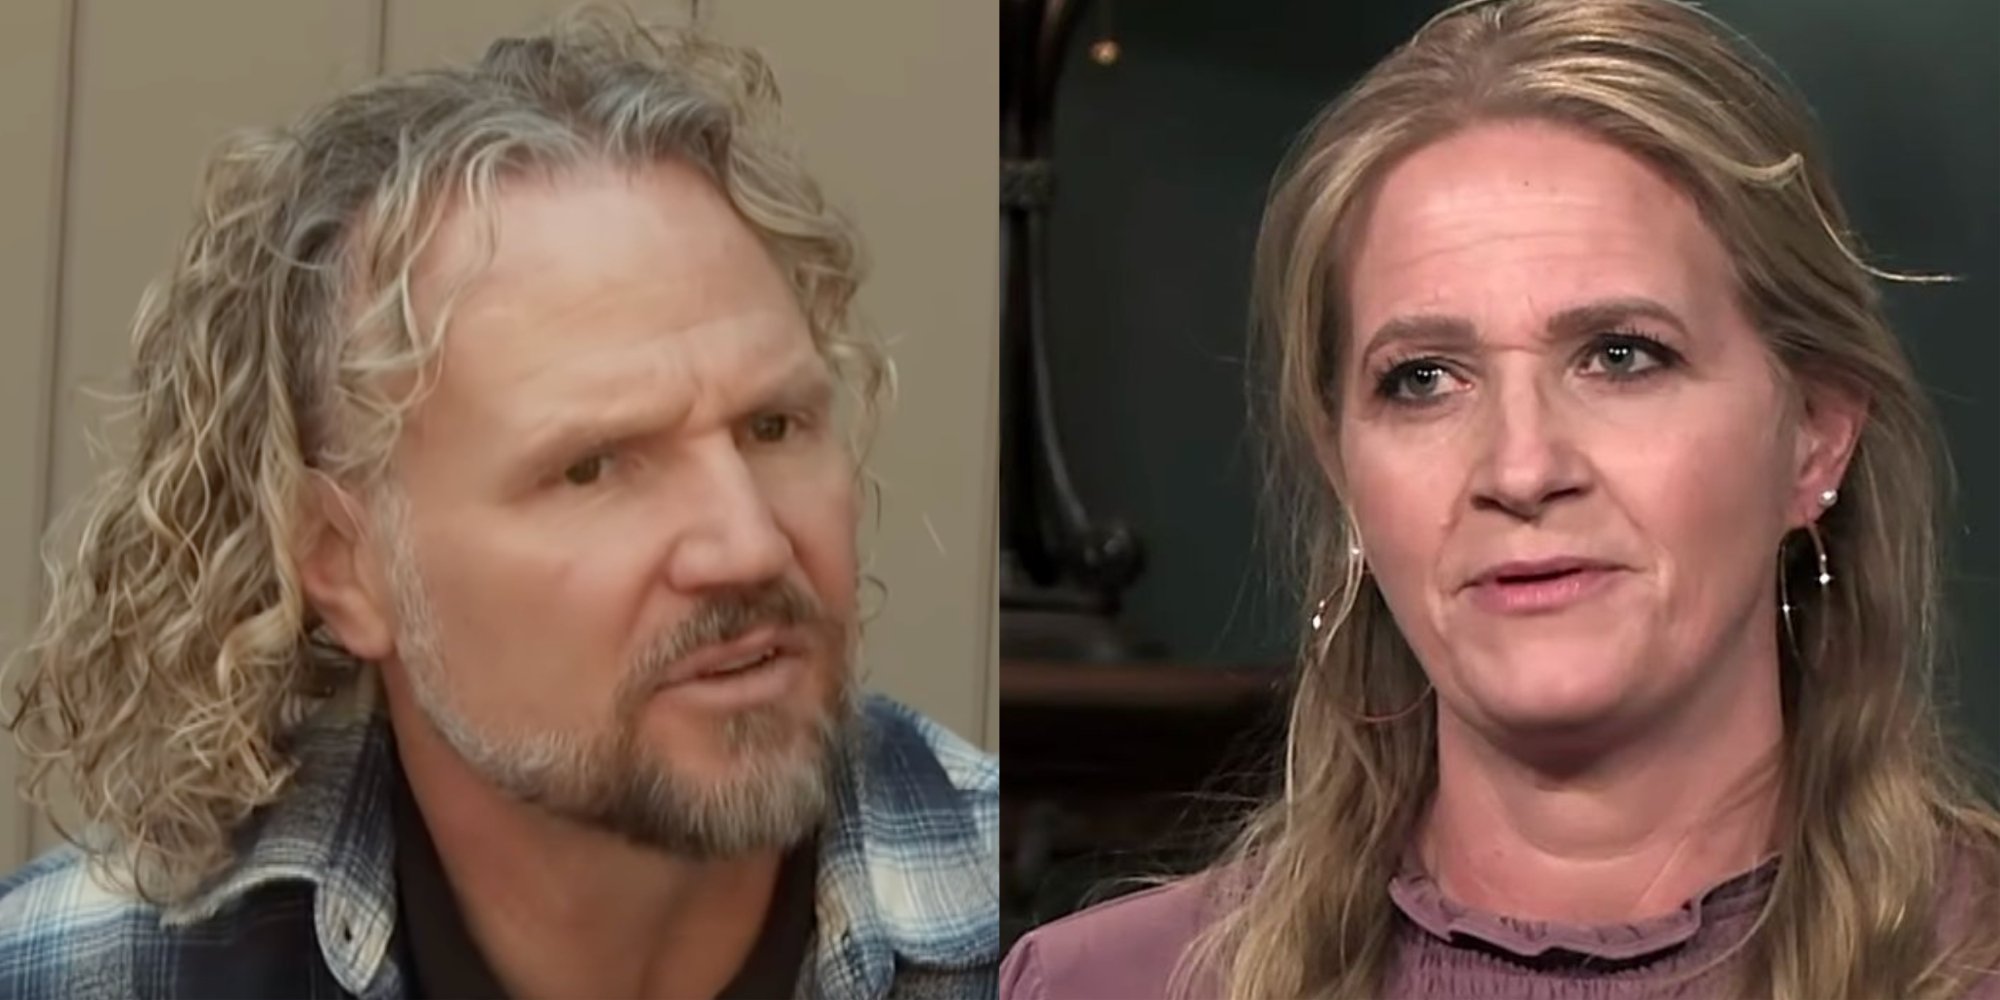 Kody Brown and Christine Brown side by side in photos from TLC's Sister Wives.